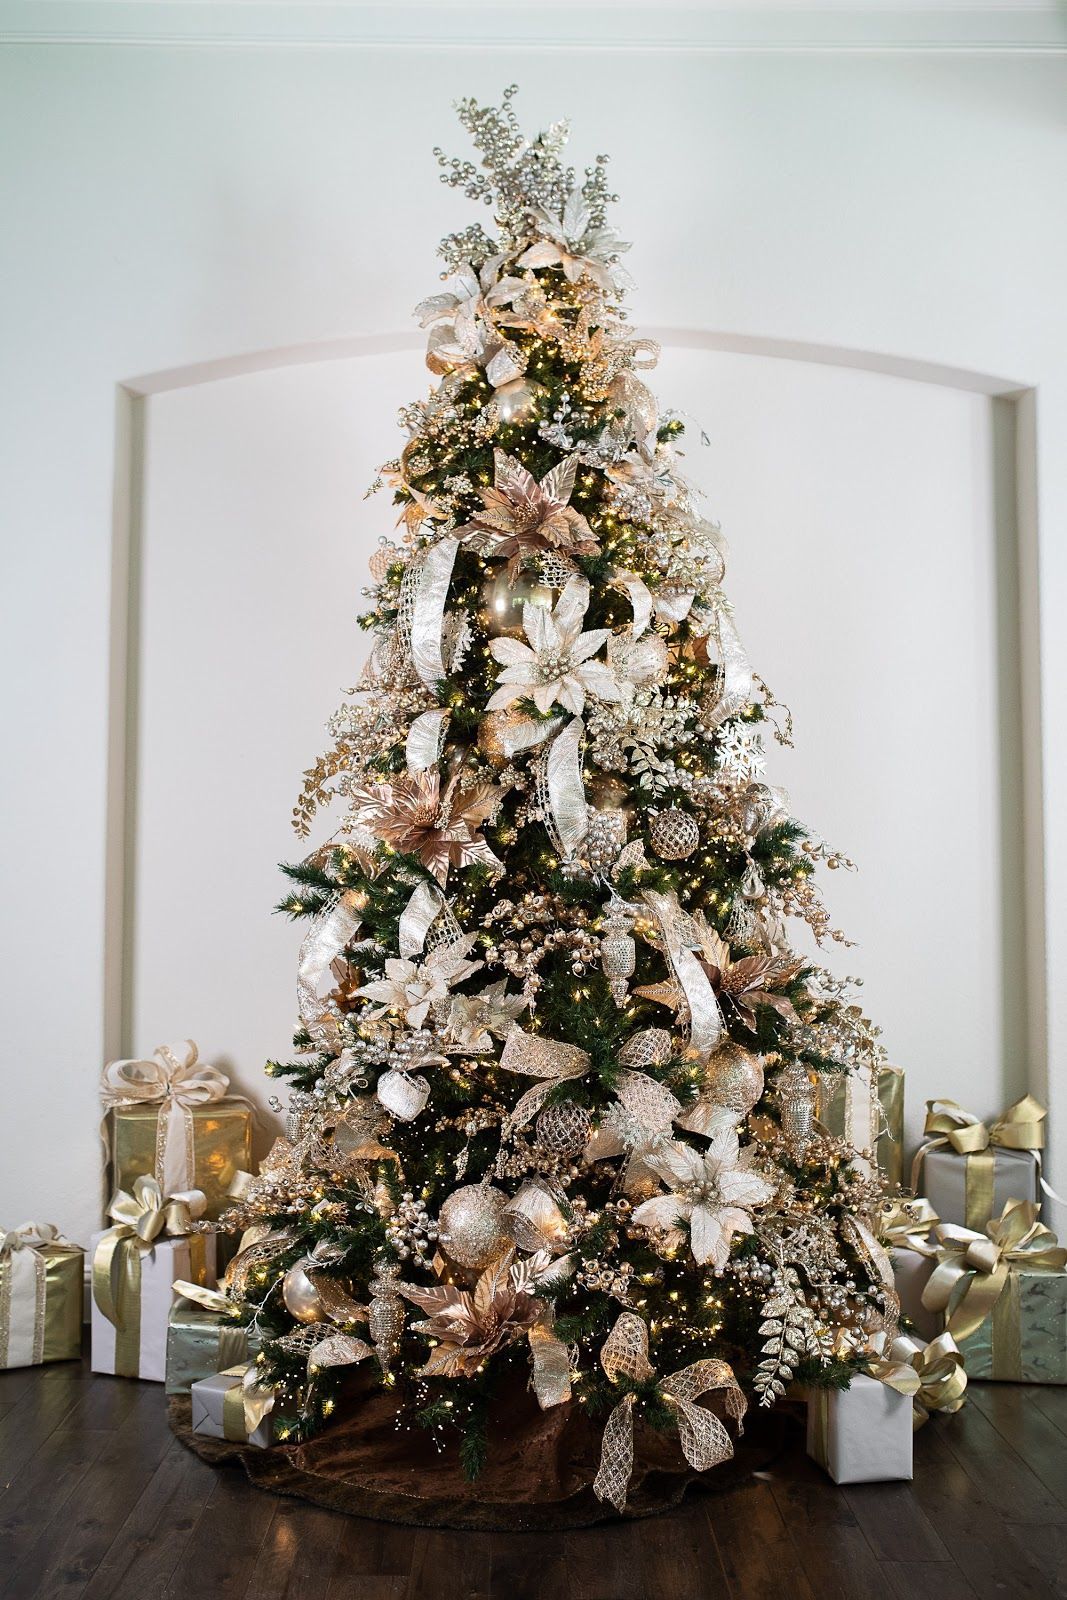 Top Trends in Christmas Home Decor for 2020 -